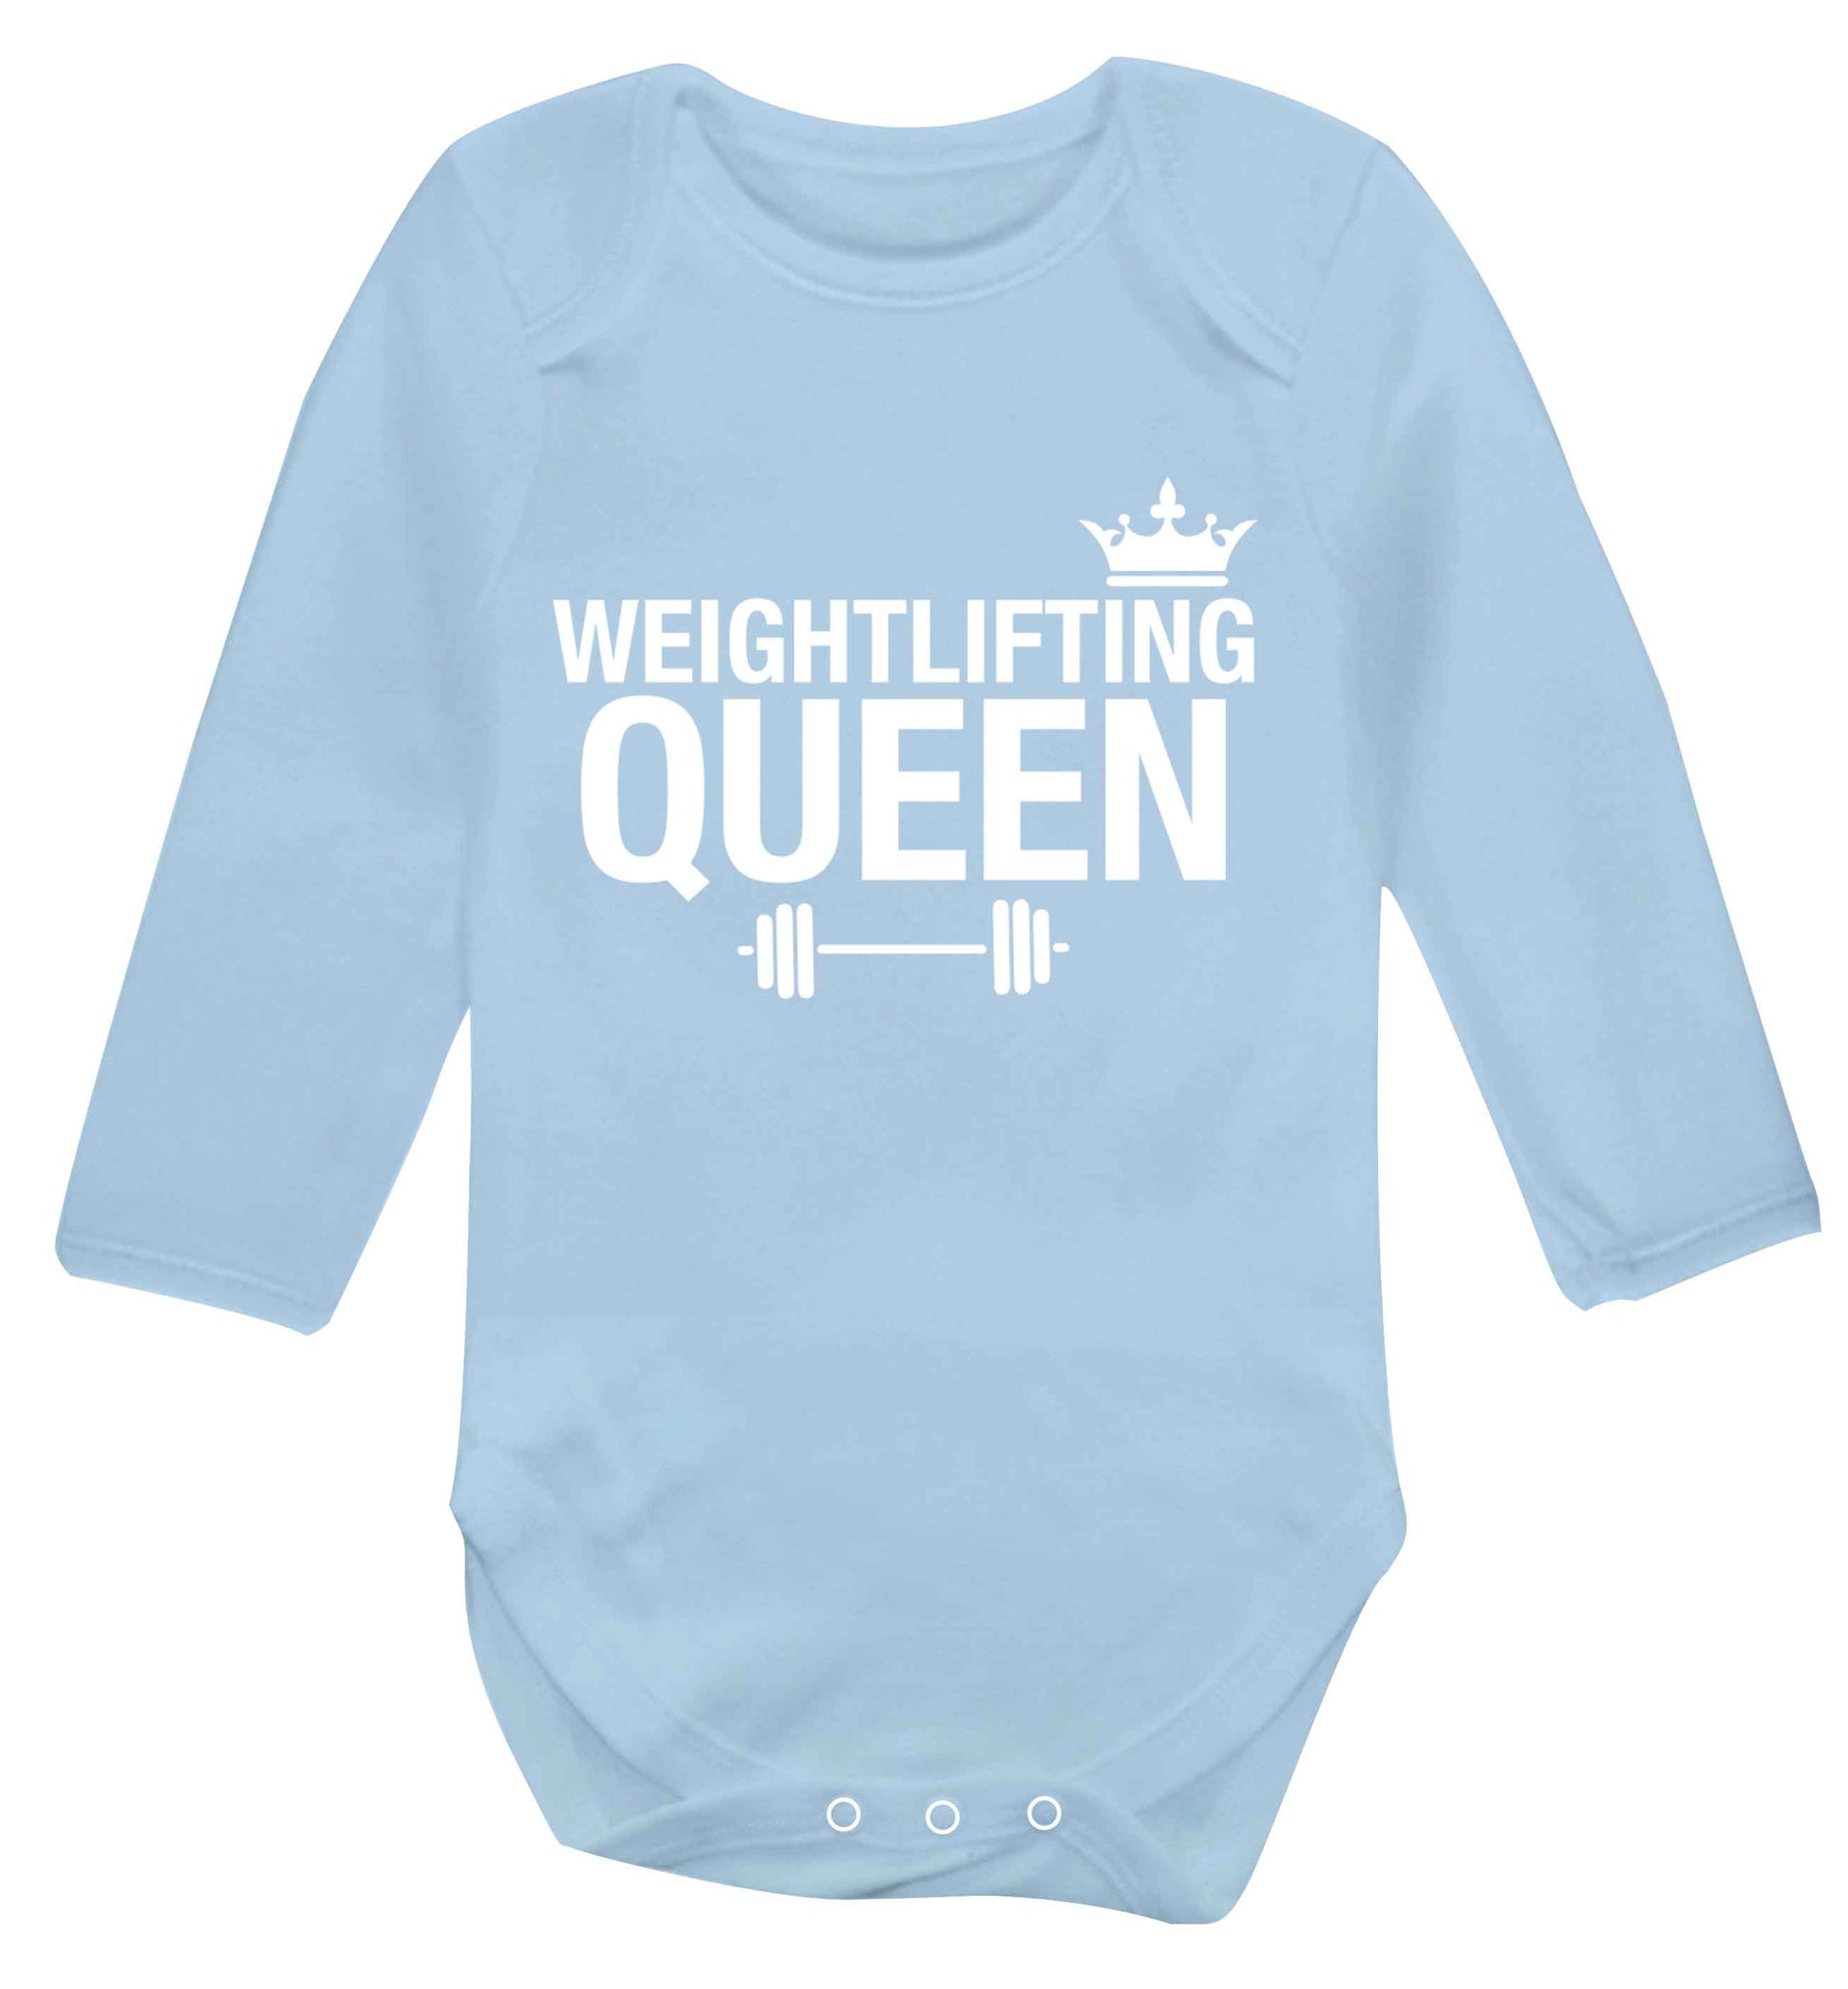 Weightlifting Queen Baby Vest long sleeved pale blue 6-12 months